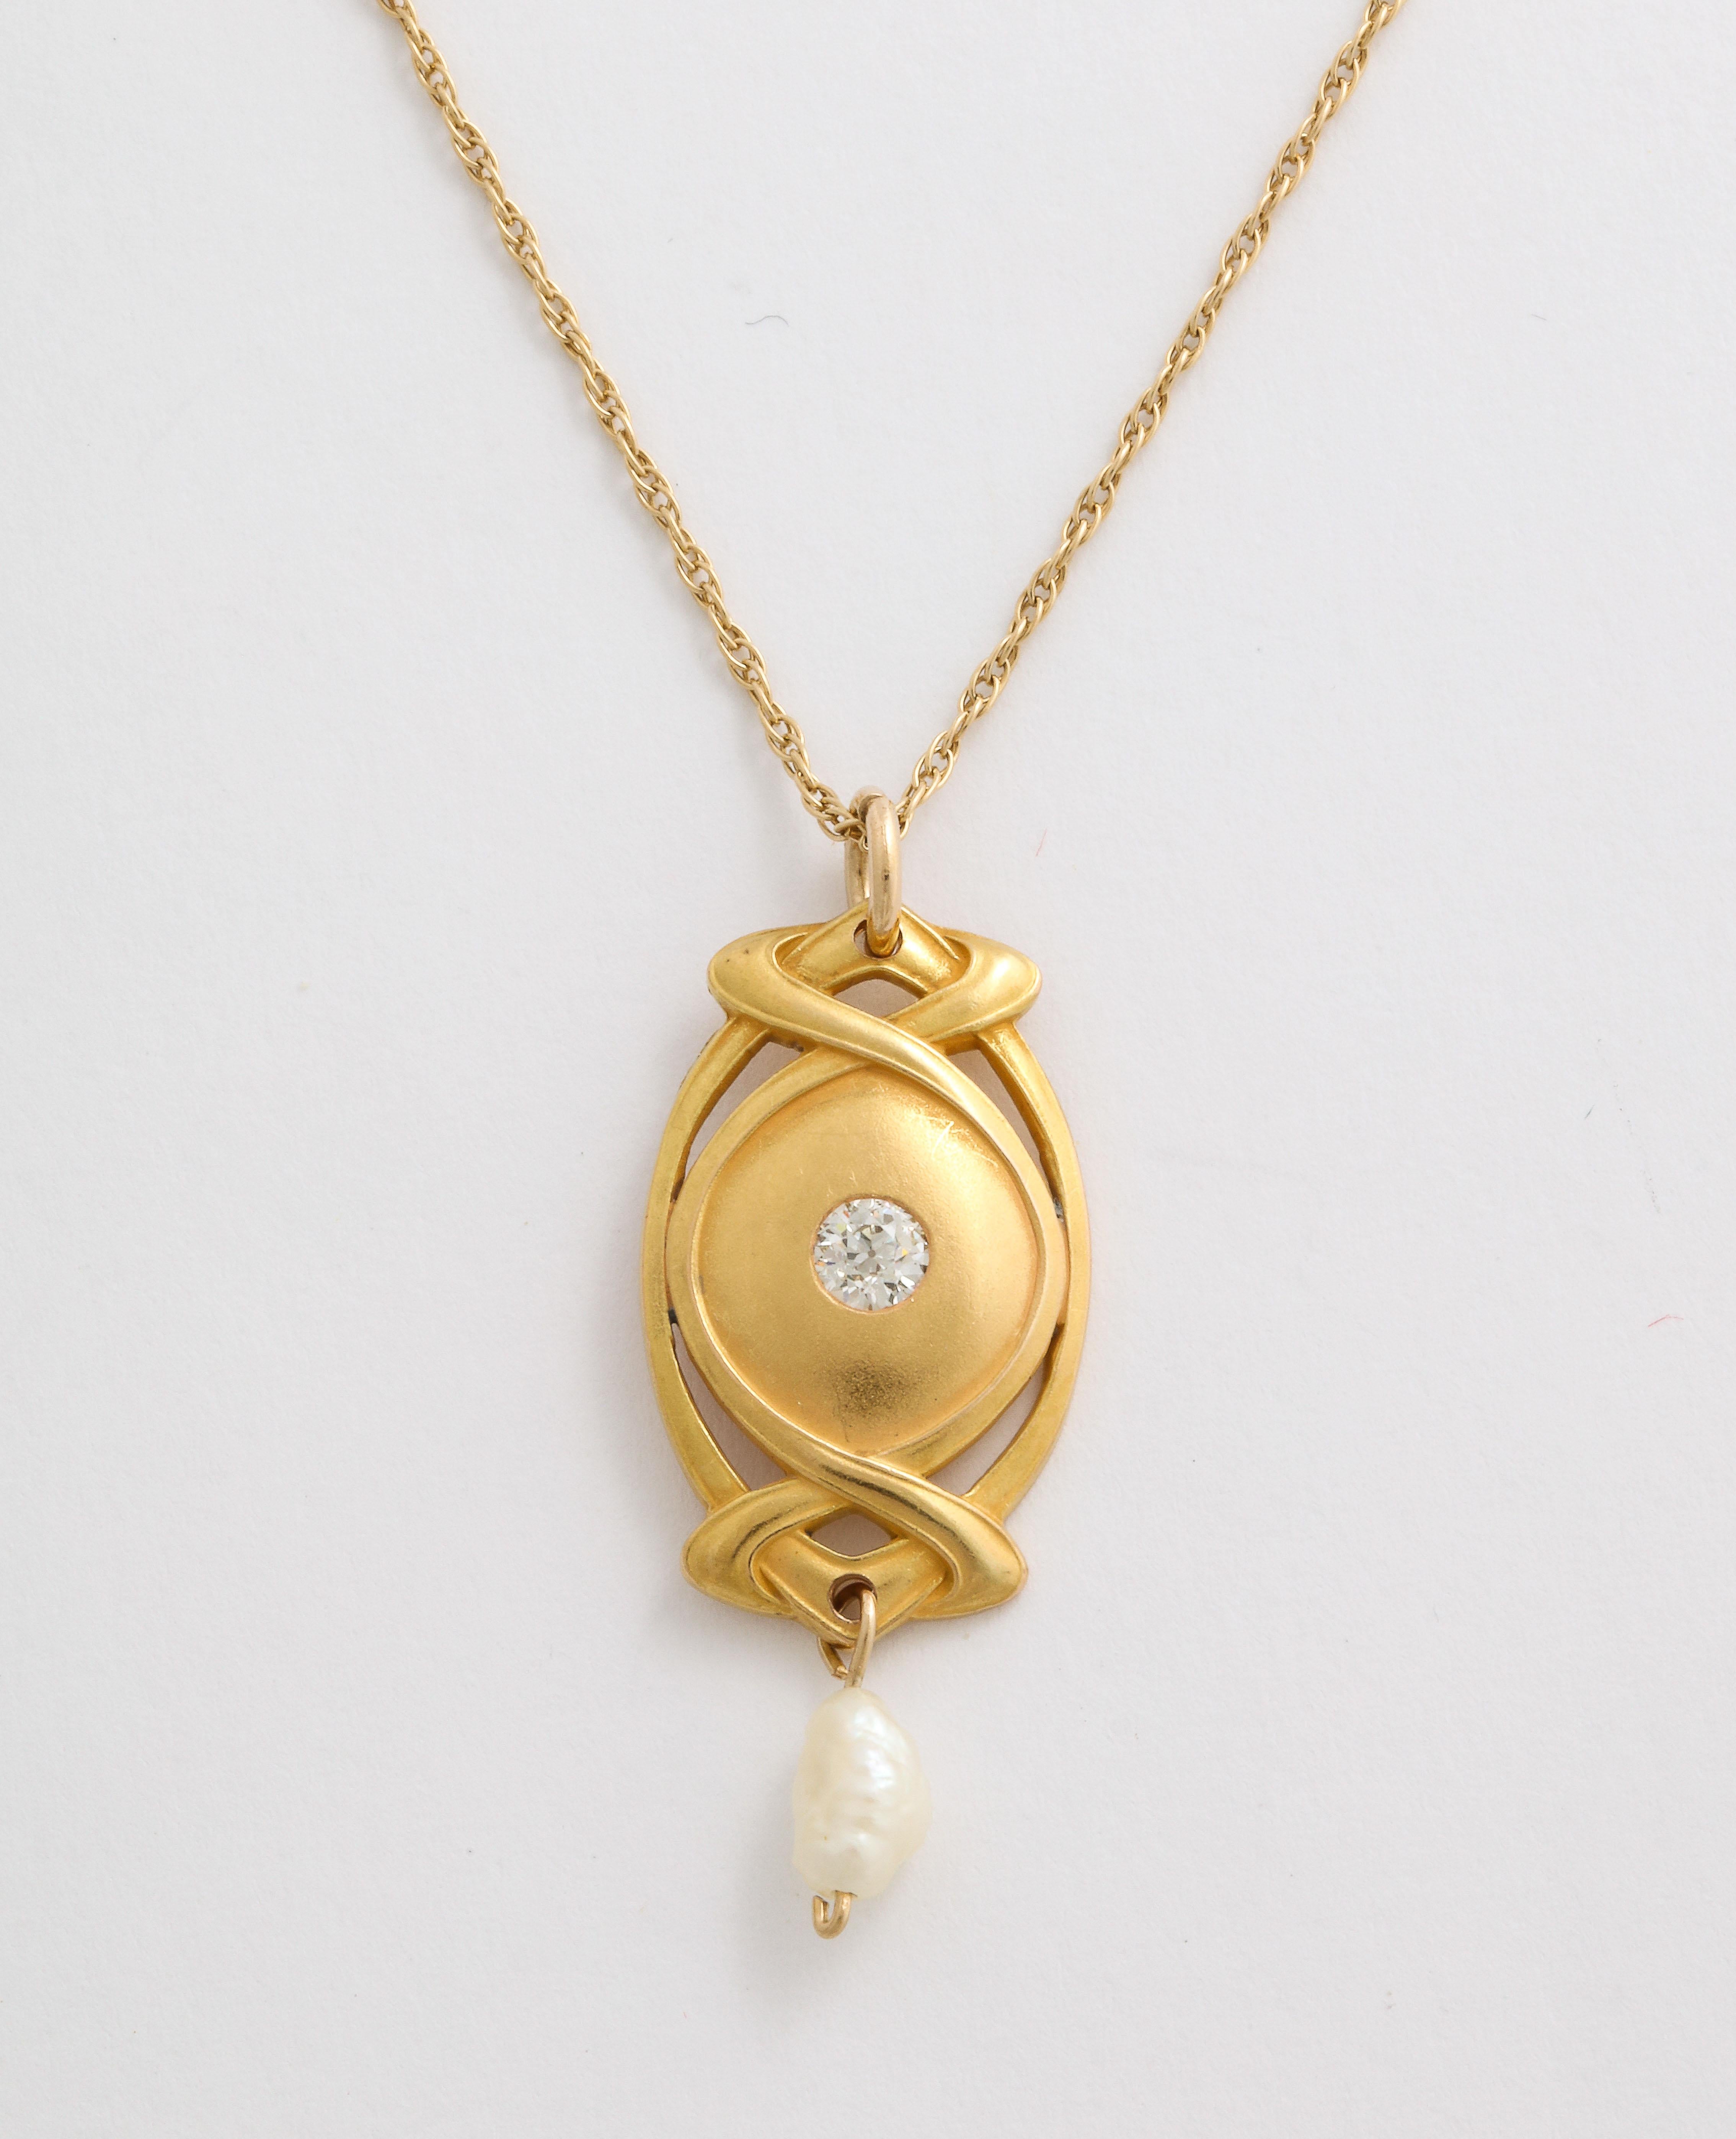 A beautifully bloomed, delicate 14 Kt gold Art Nouveau pendant suspends a blister pearl and has, at center, a bright, white diamond old diamond of approximately .13 cts. Blister pearls were often a choice during the Art Nouveau period. Concentration